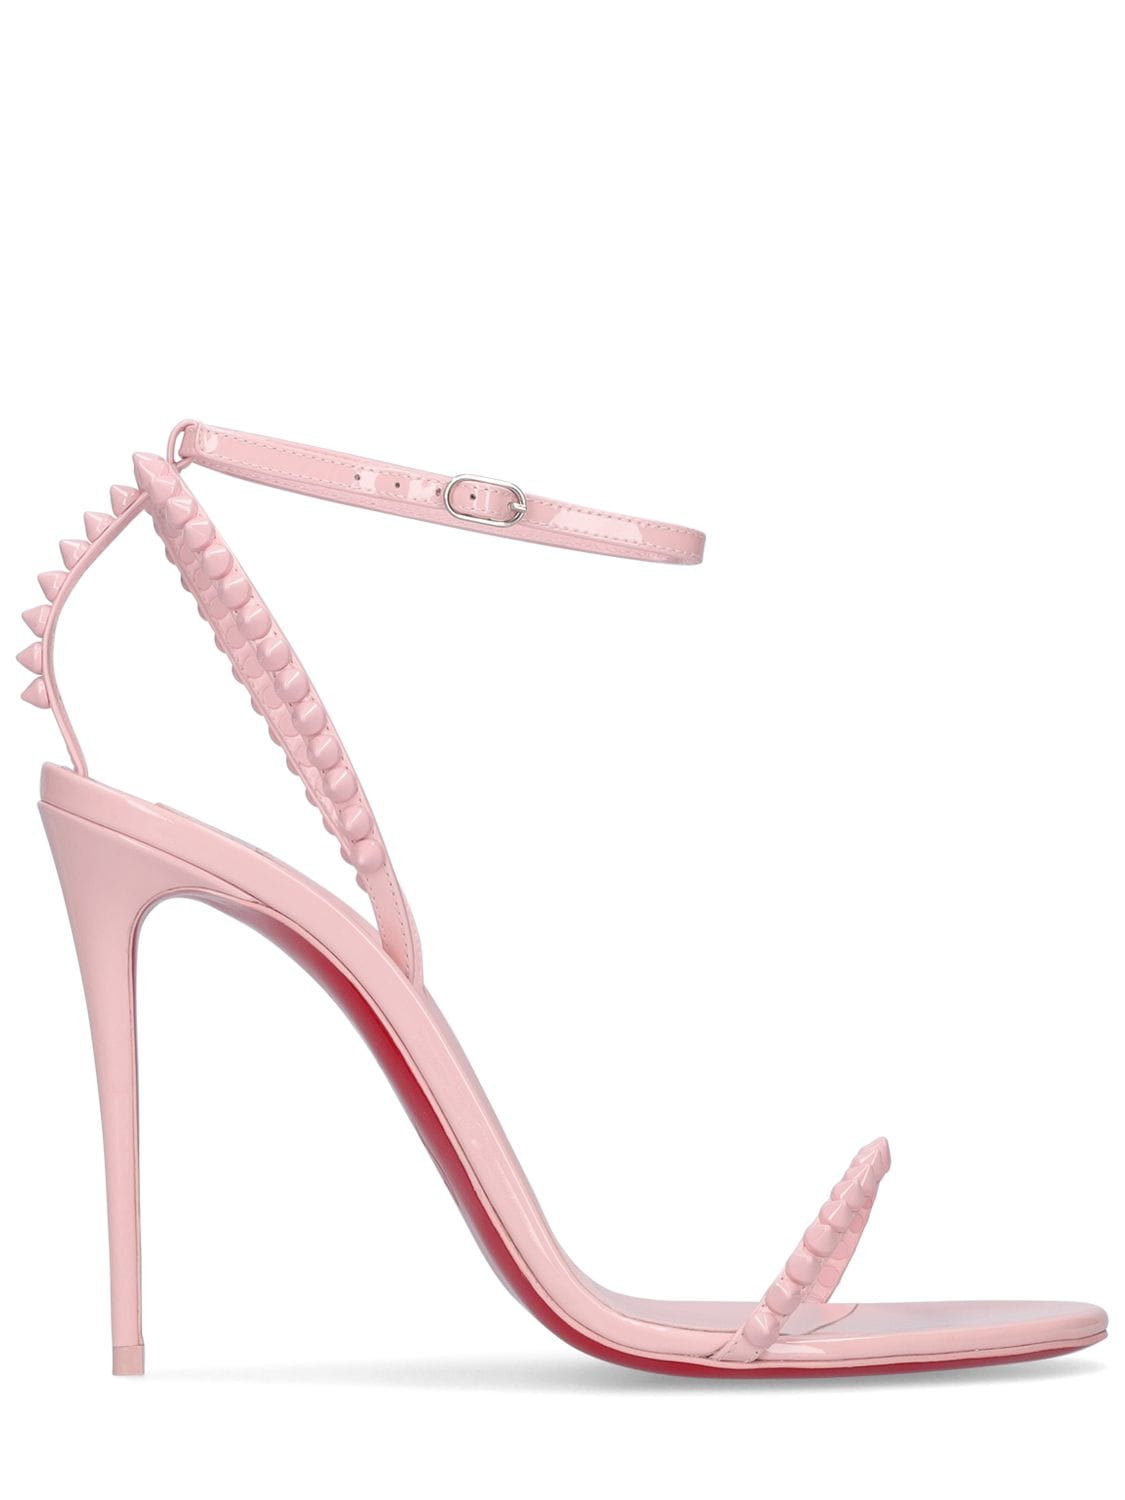 CHRISTIAN LOUBOUTIN 100mm So Me Patent Leather Sandals